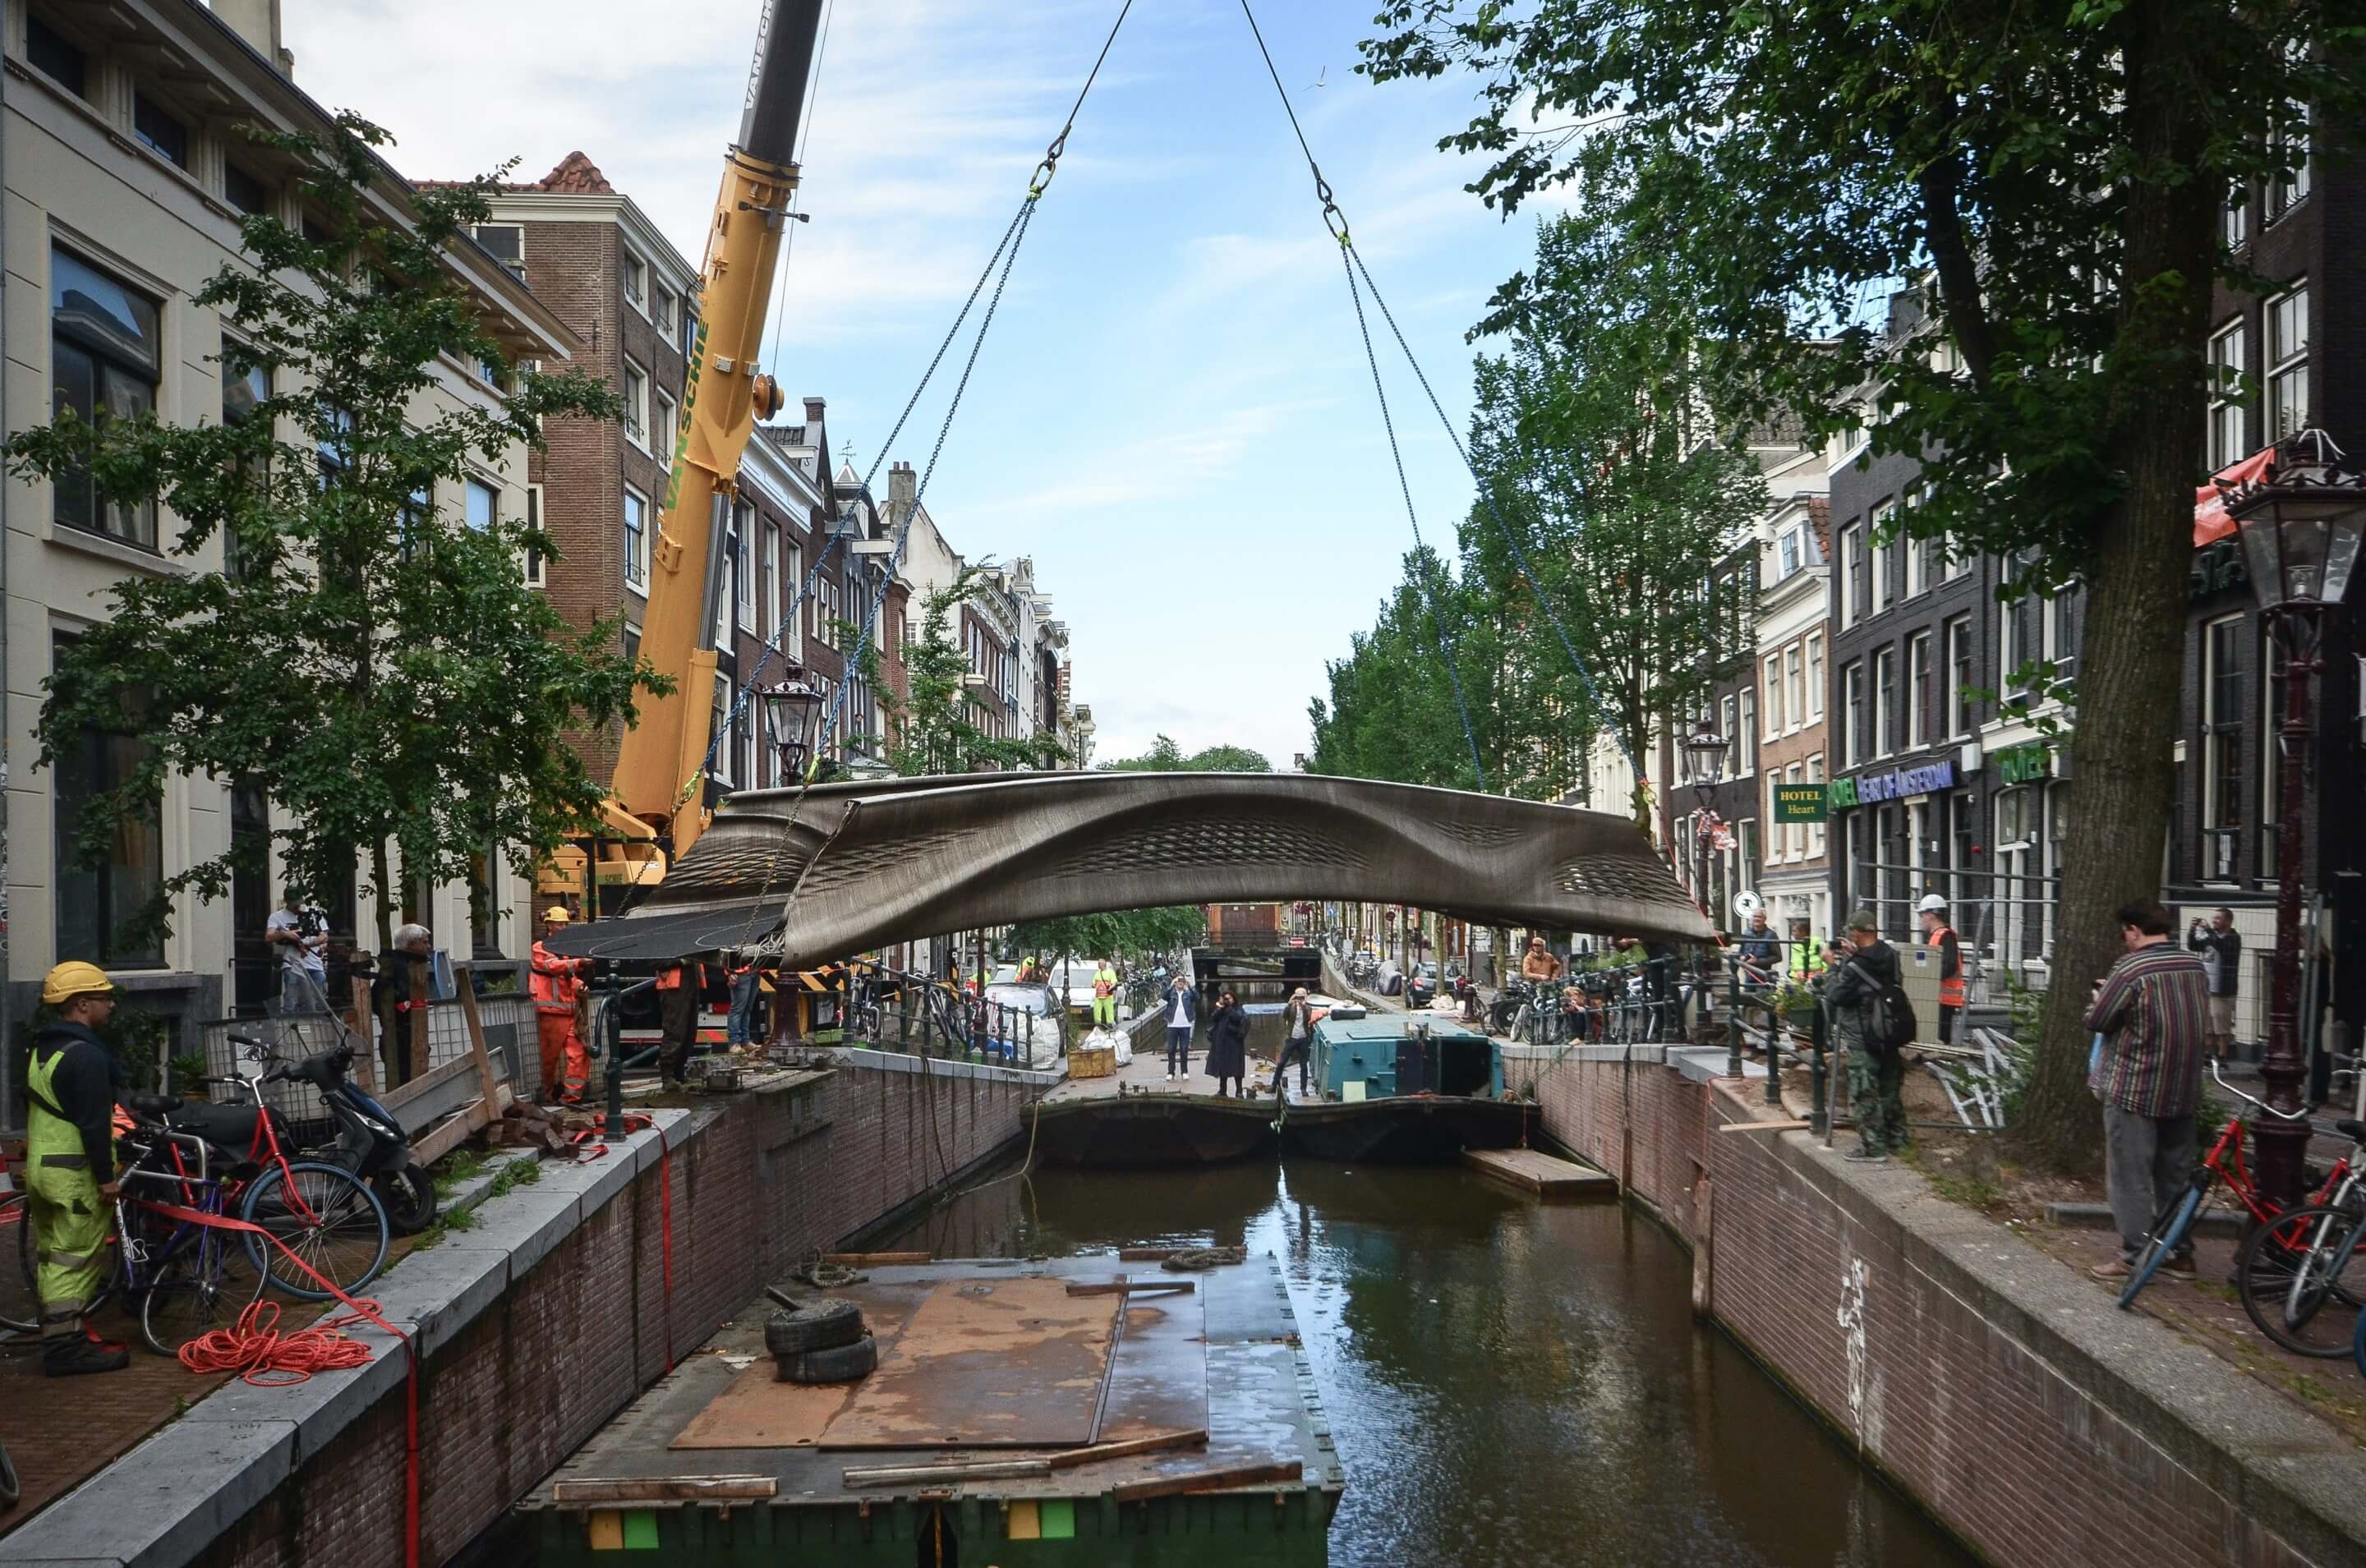 a steel foot bridge being installed by crane over a canal